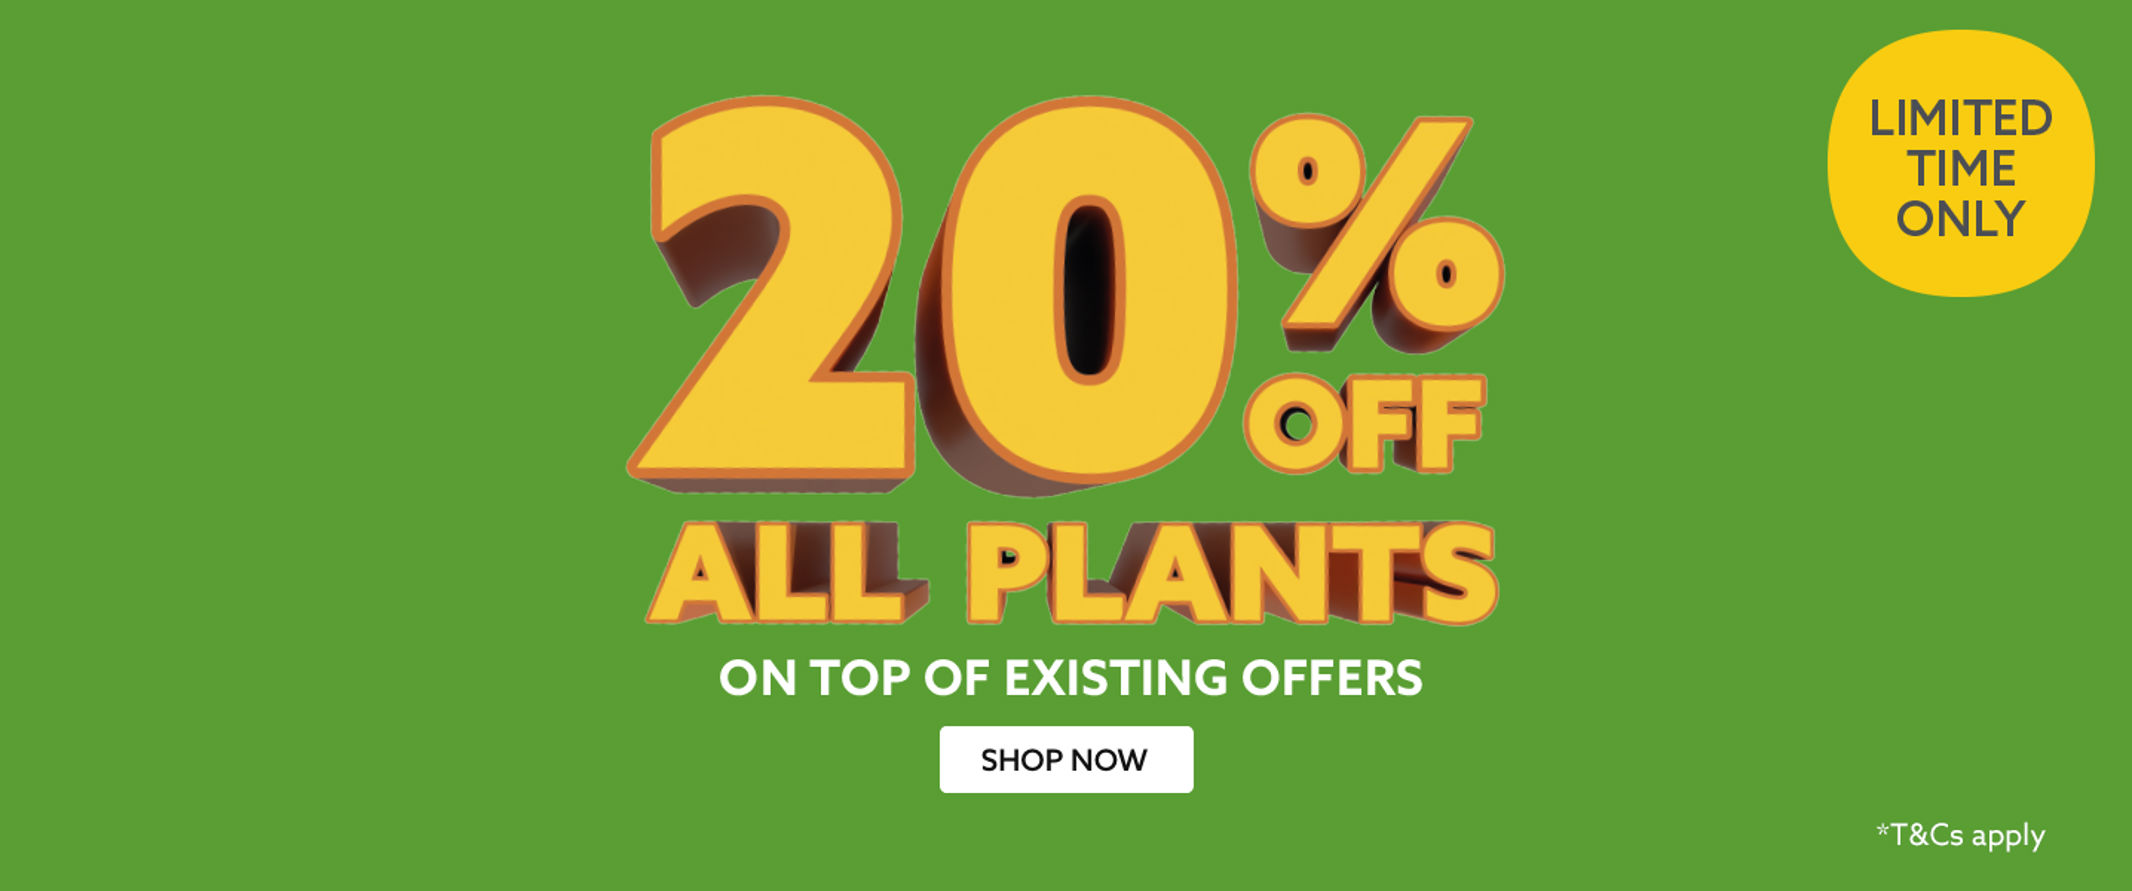 20% off all plants